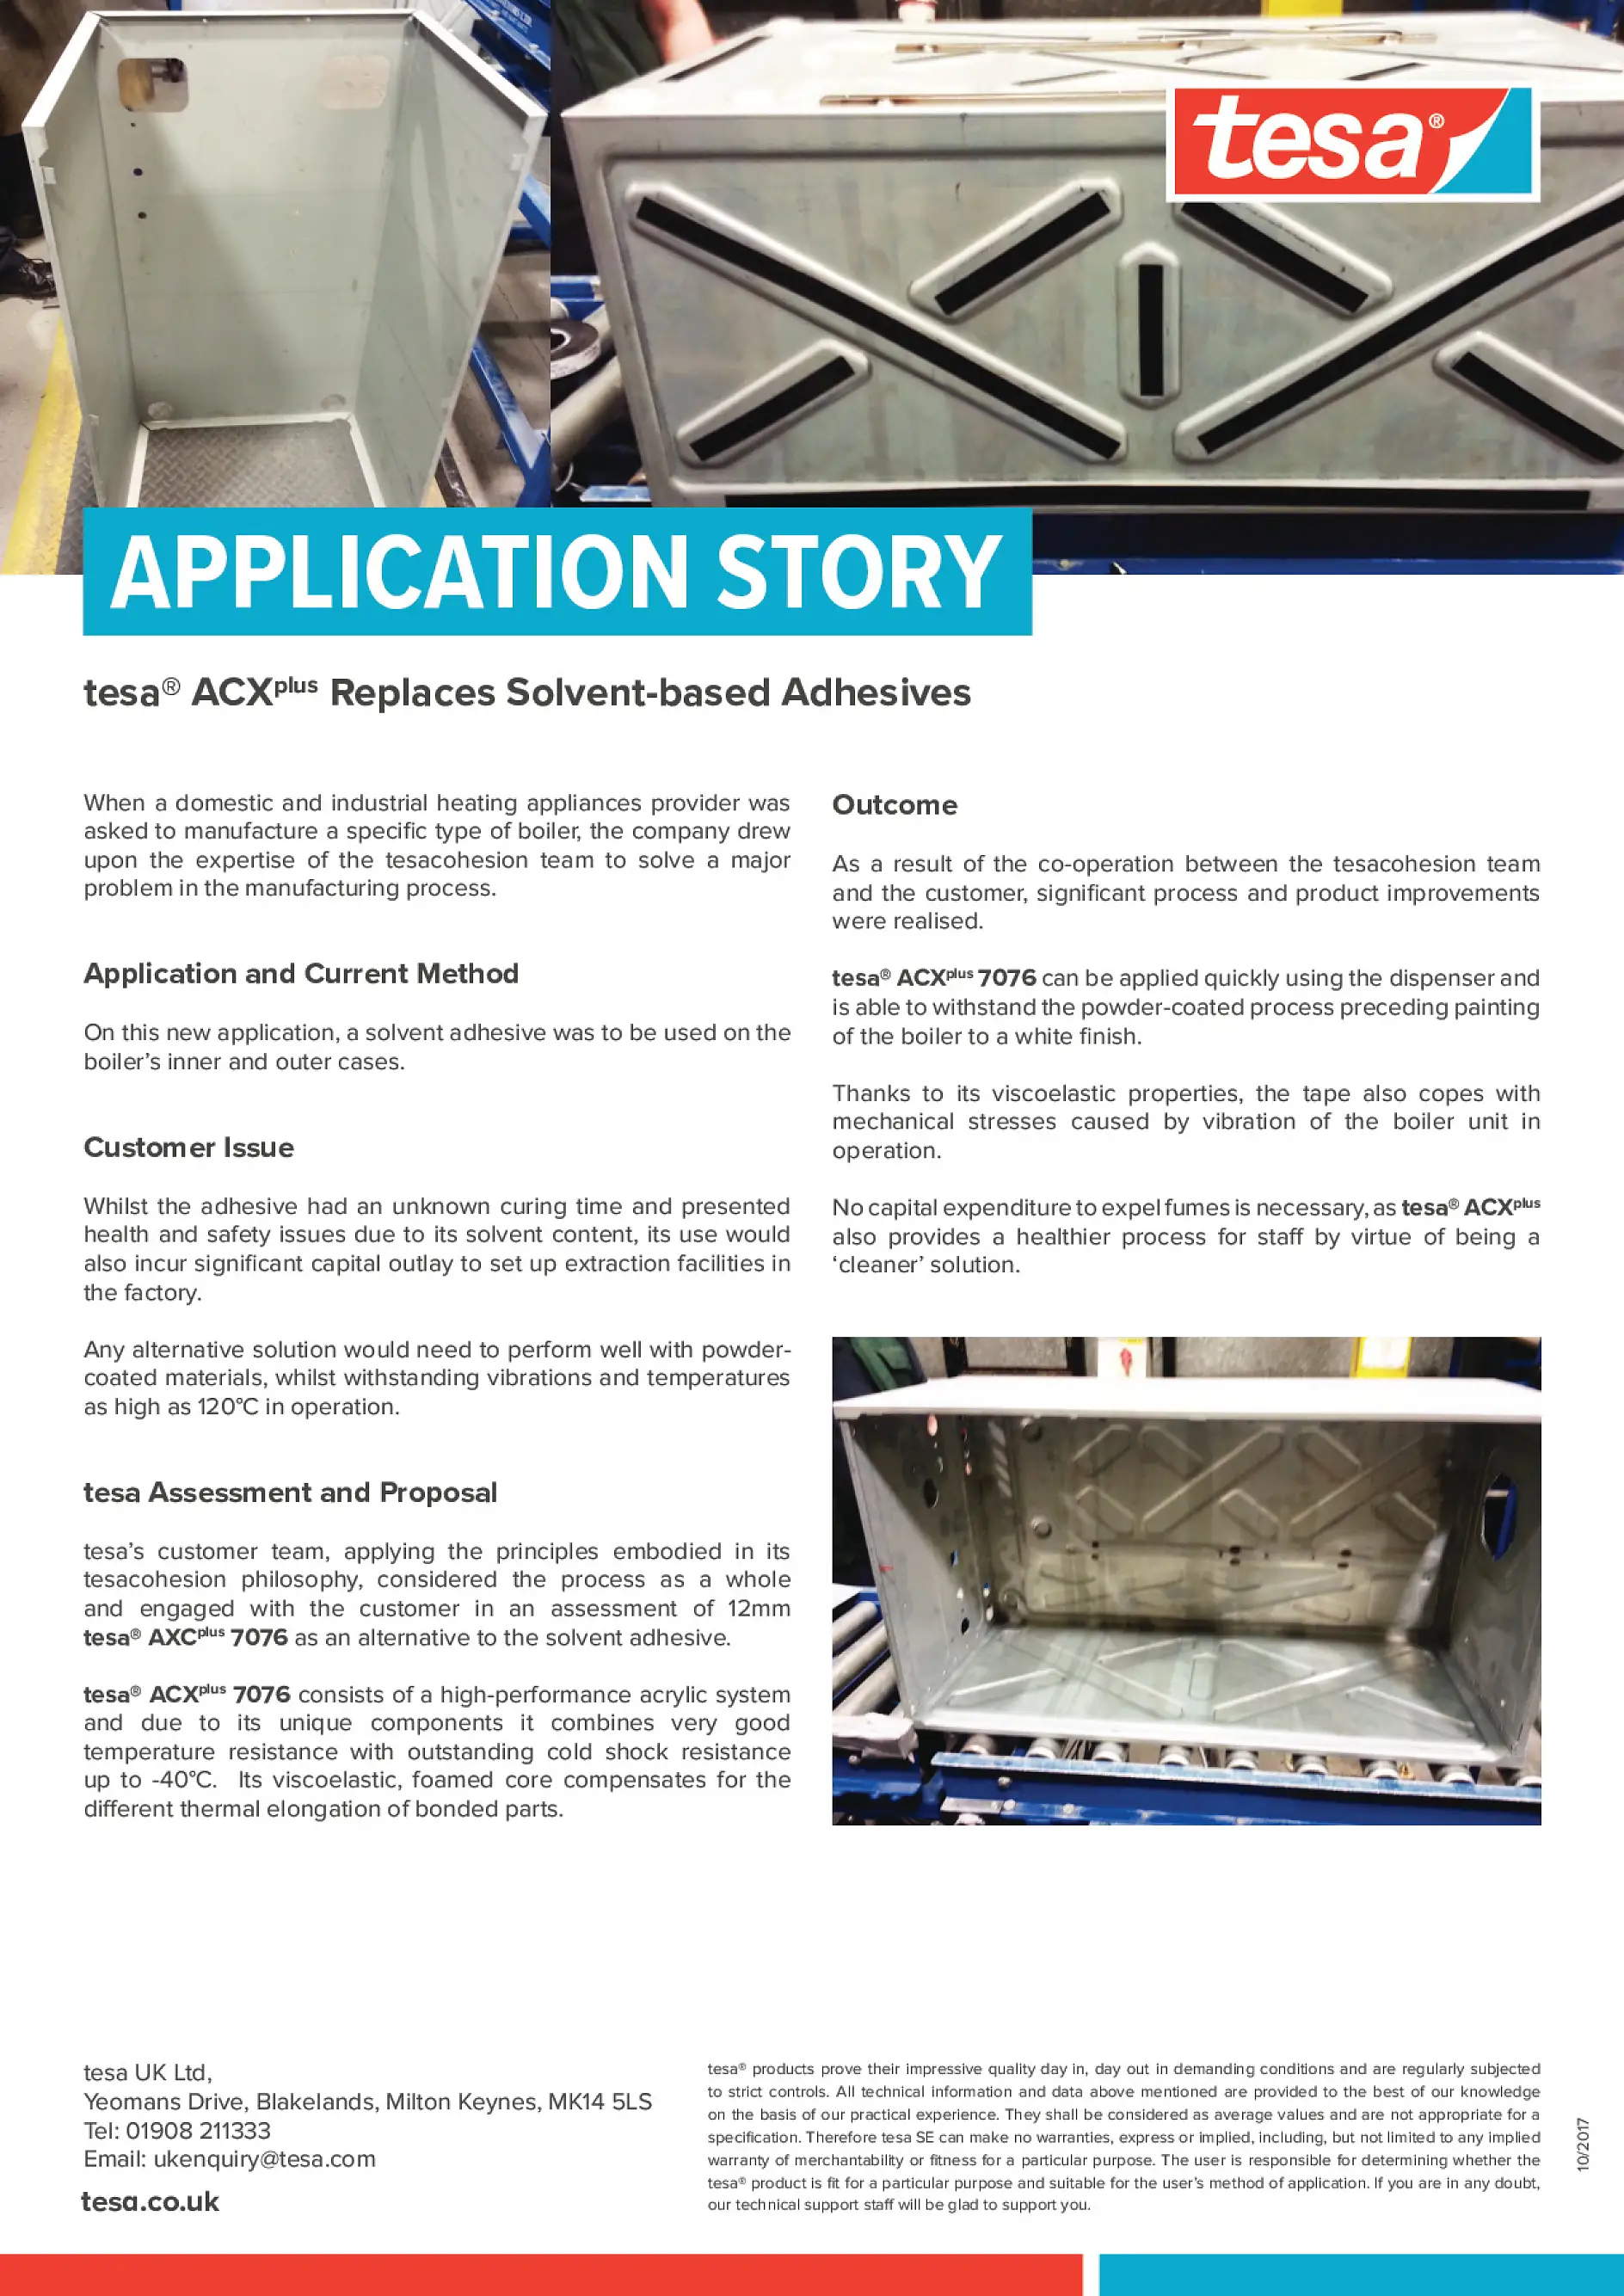 APPLICATION STORY - Heating Appliance